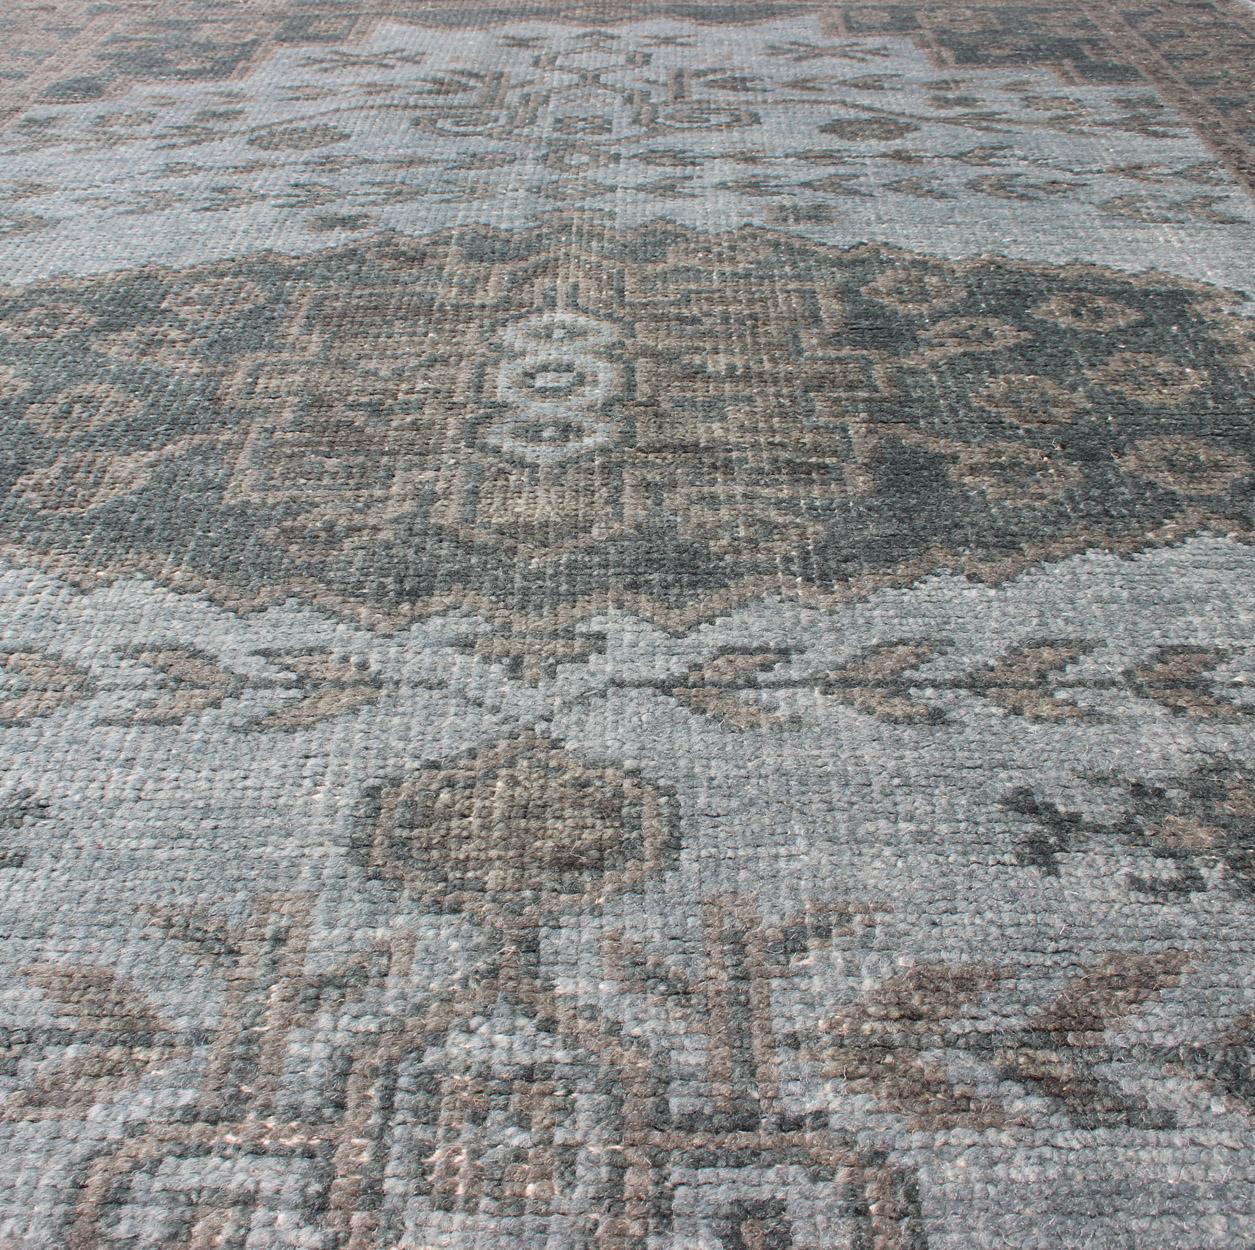 Wool Oushak Design Distressed Rug in Gray, Taupe, & Cream with large Medallion Design